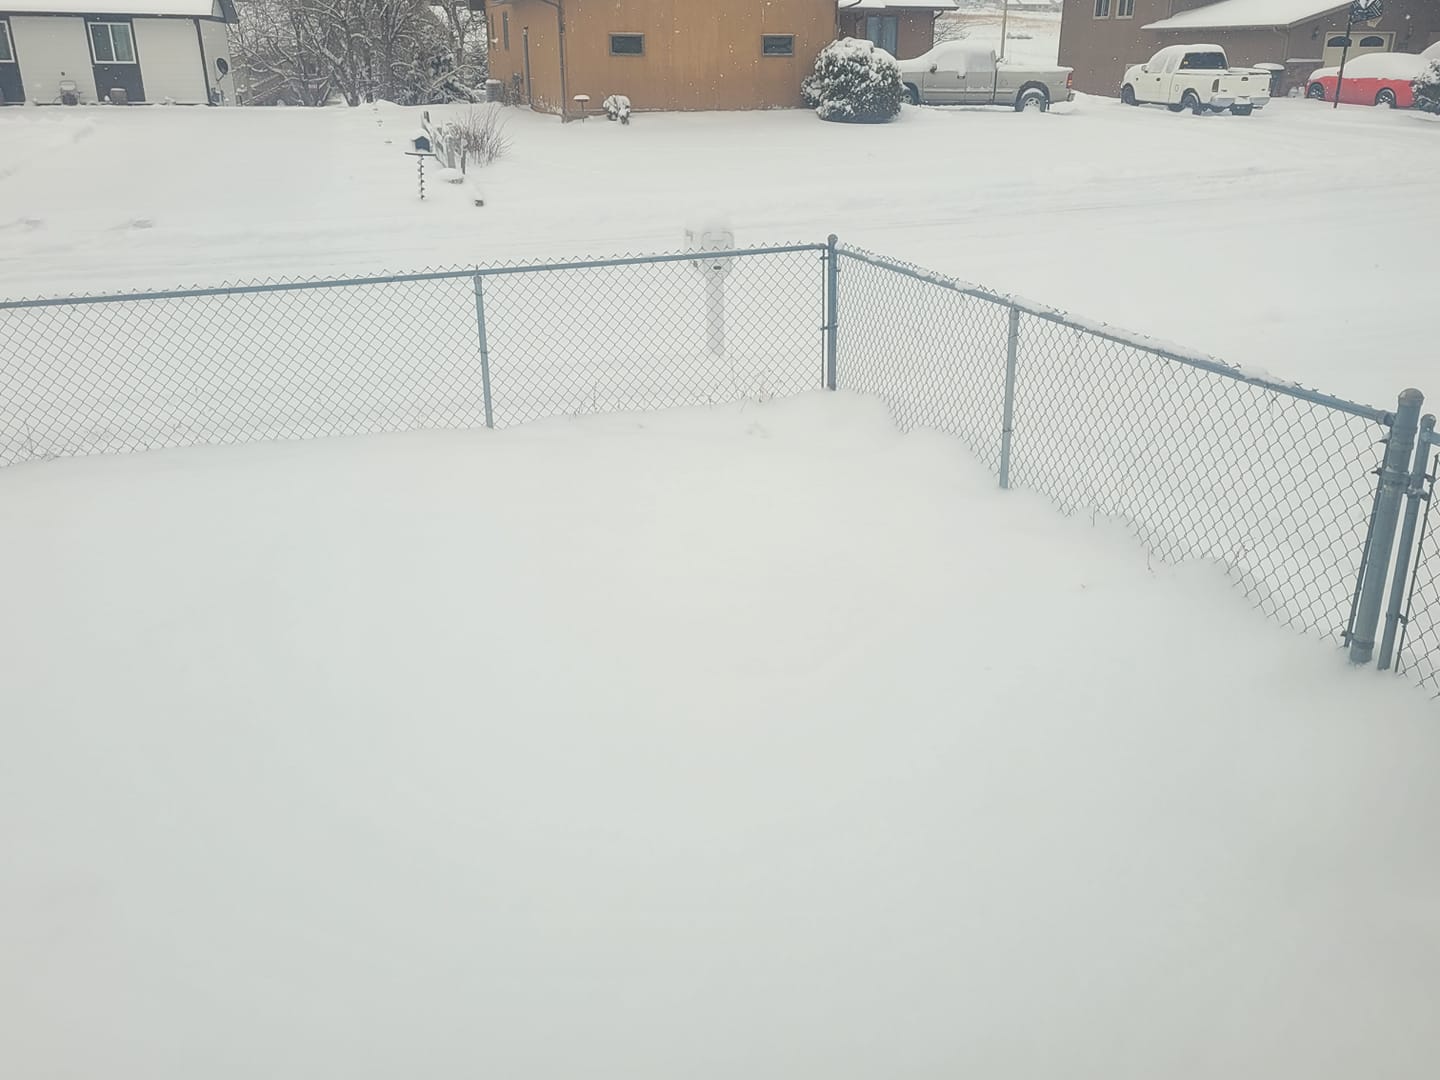 Fence with heavy snowfall around it